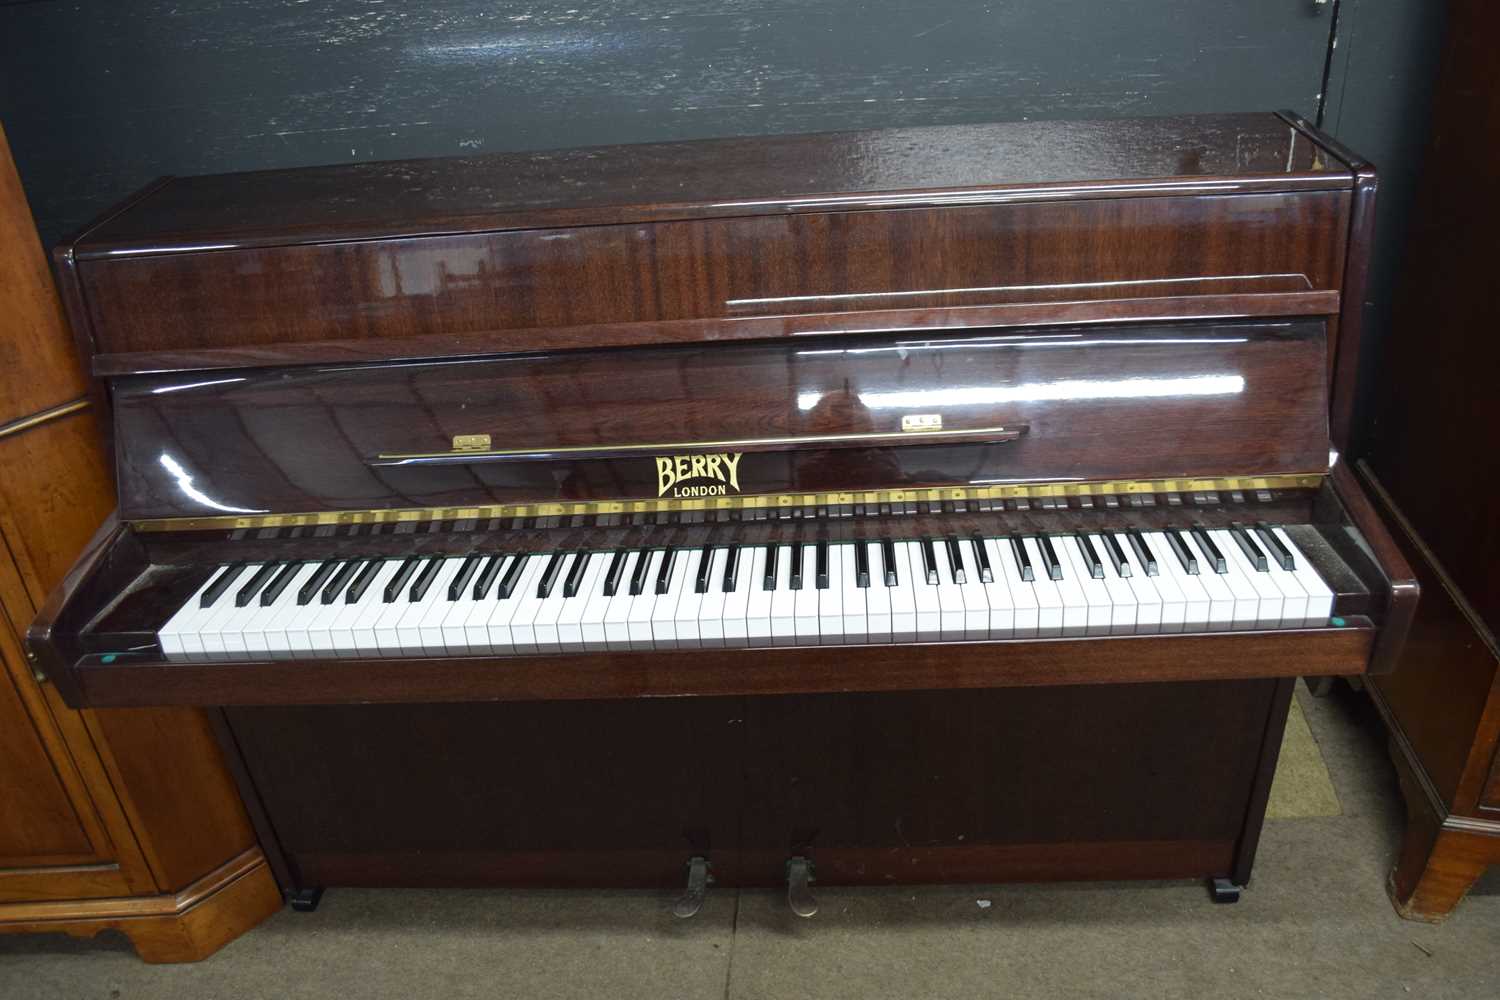 Berry of London, modern upright piano with accompanying stool, 140cm wide (2) - Image 4 of 4